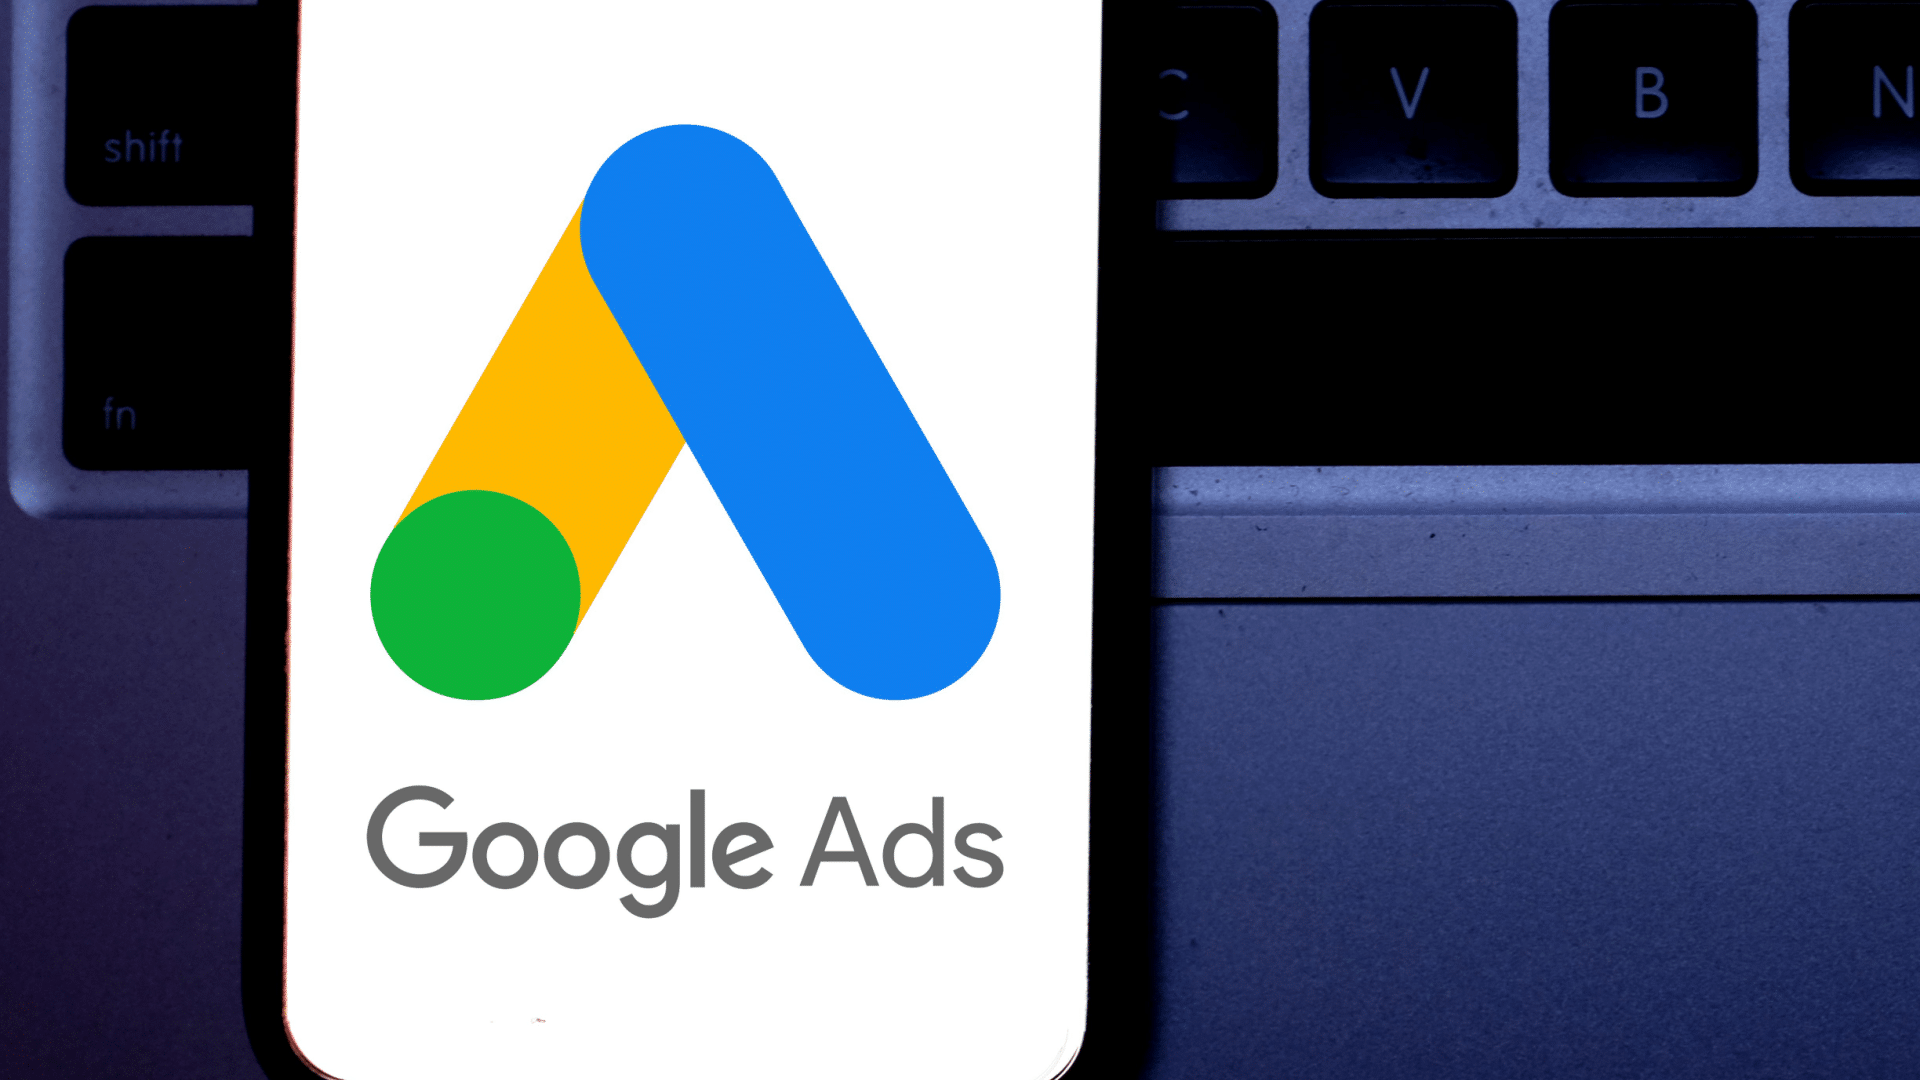 Google Ads trials enhanced customer service for small businesses